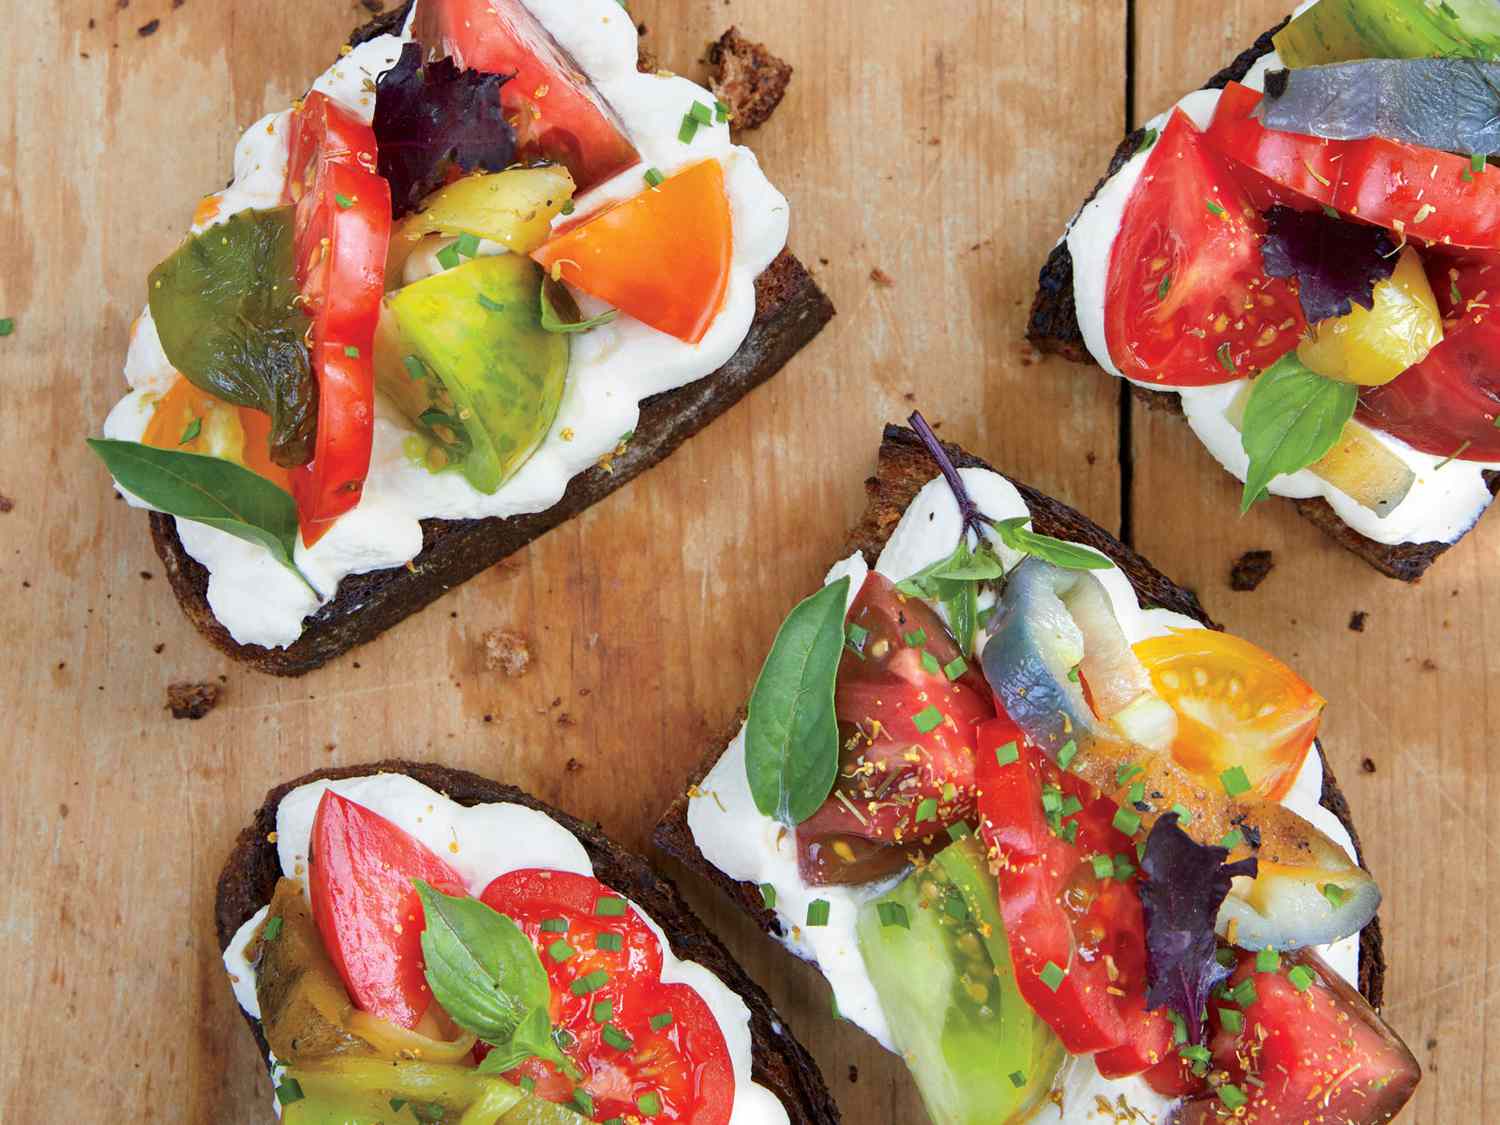 Heirloom Tomato and Pepper Toasts with Whipped Ricotta Recipe